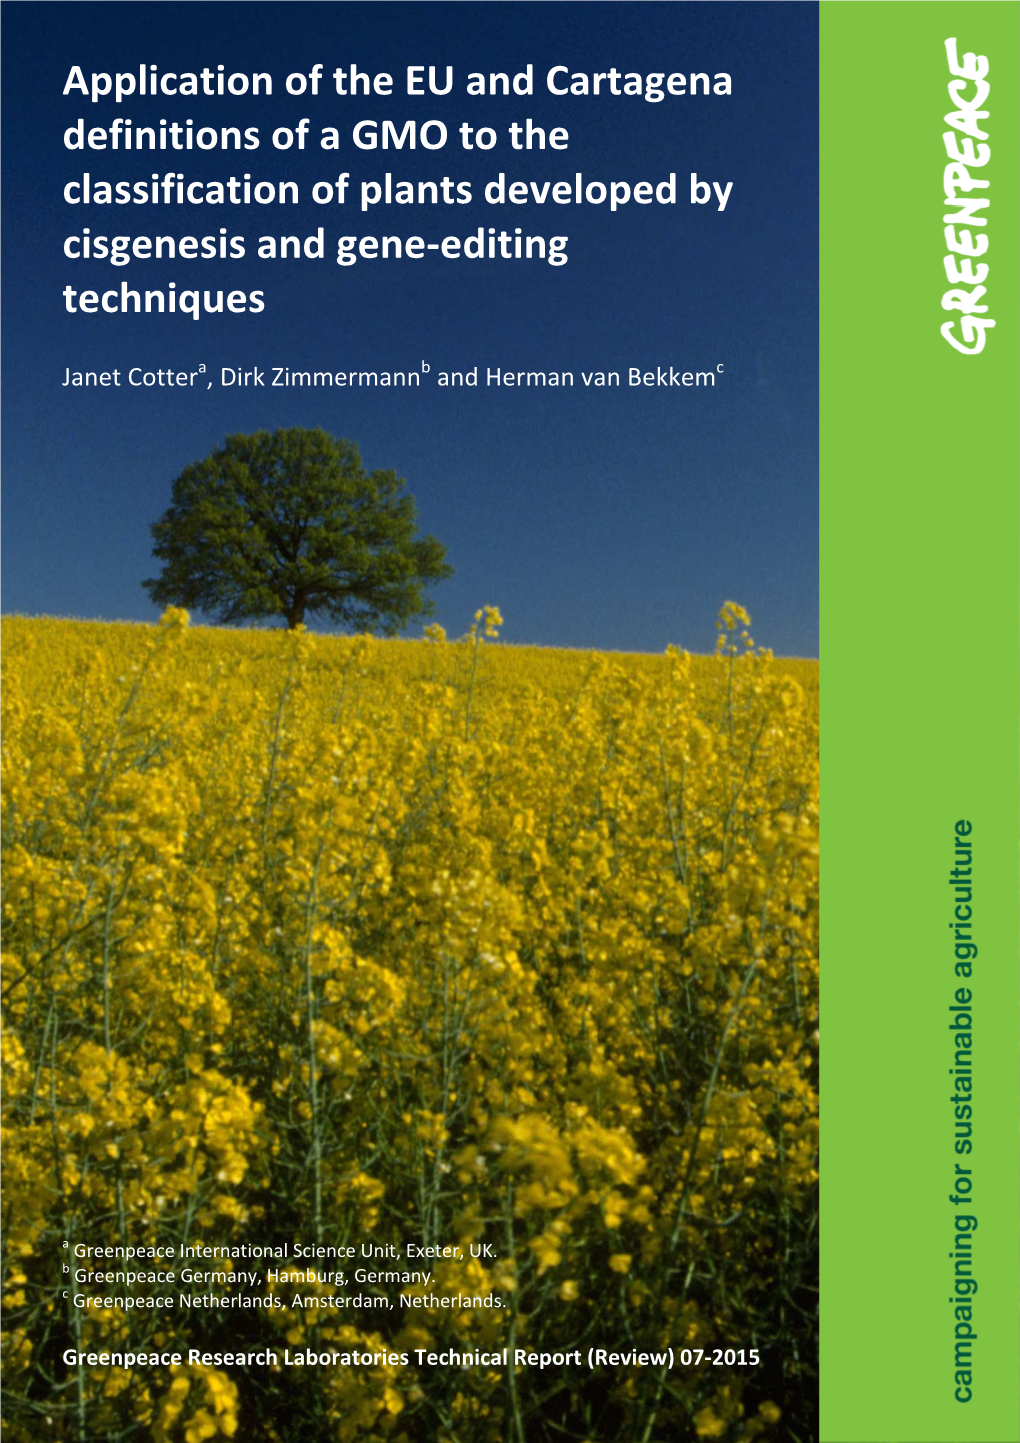 Application of GMO Definitions to Plants Developed by Cisgenesis And